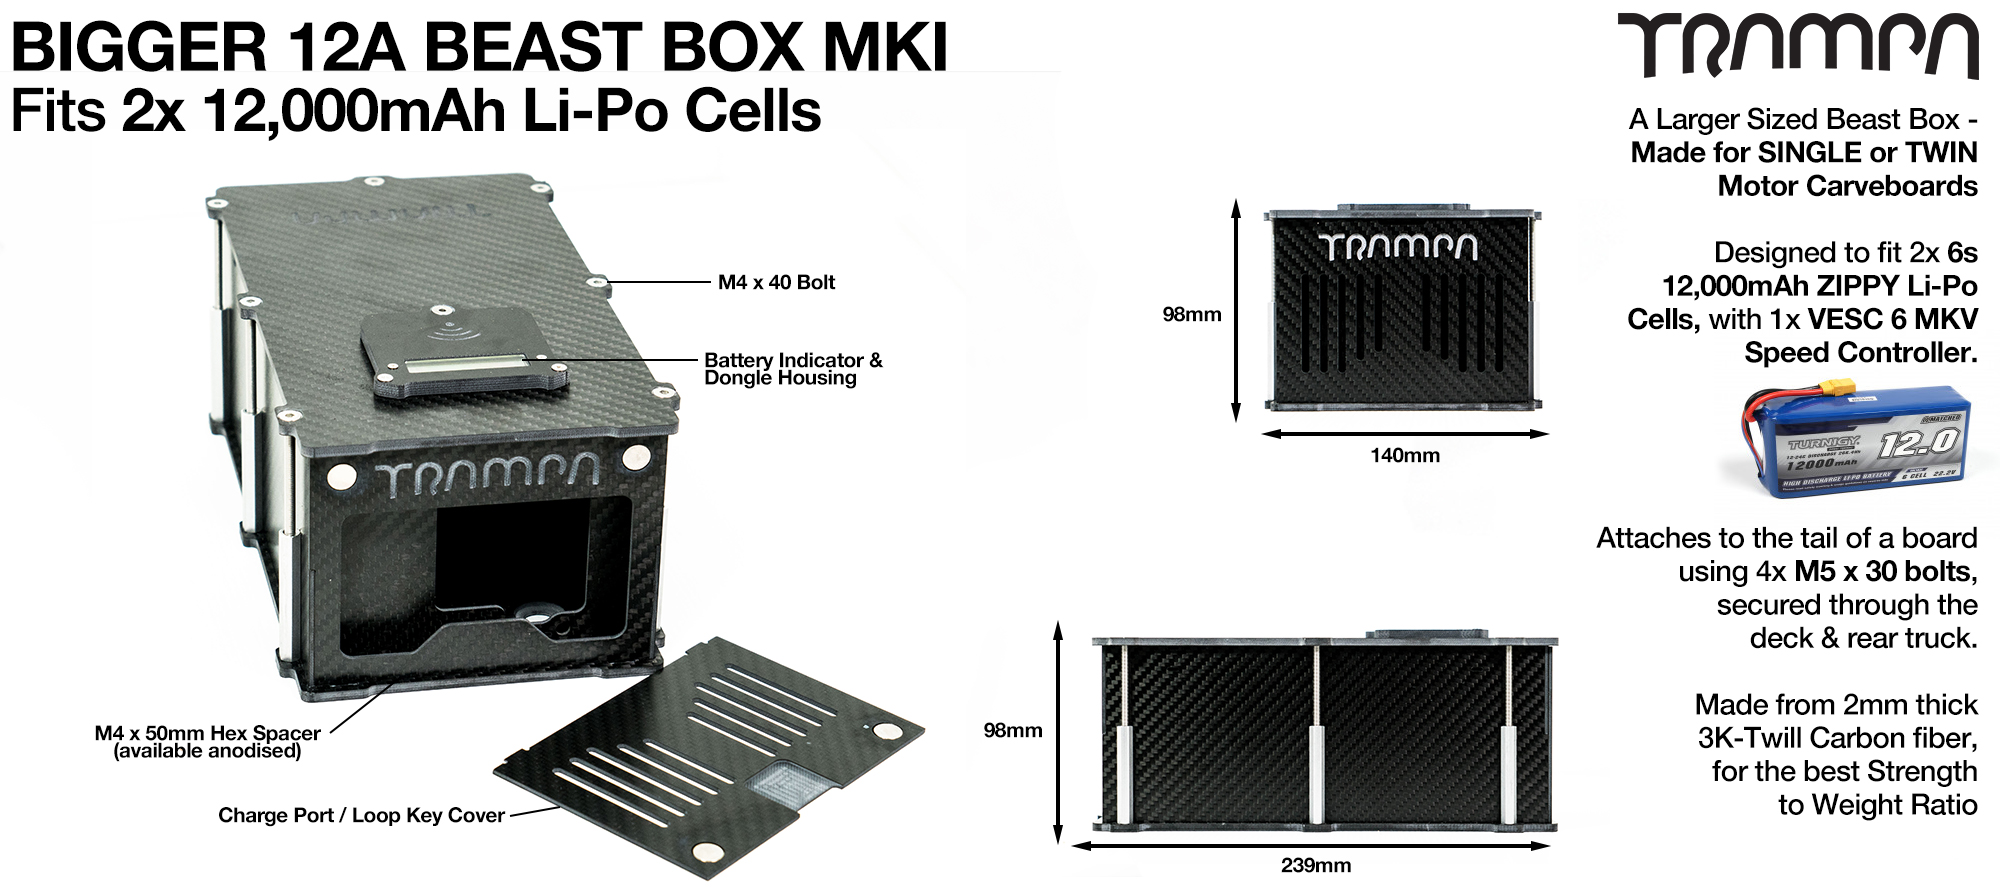 MkI 12A BIGGER BEAST Box with Internal Housing for 1x VESC 6 & 2x 6s 12A cells 